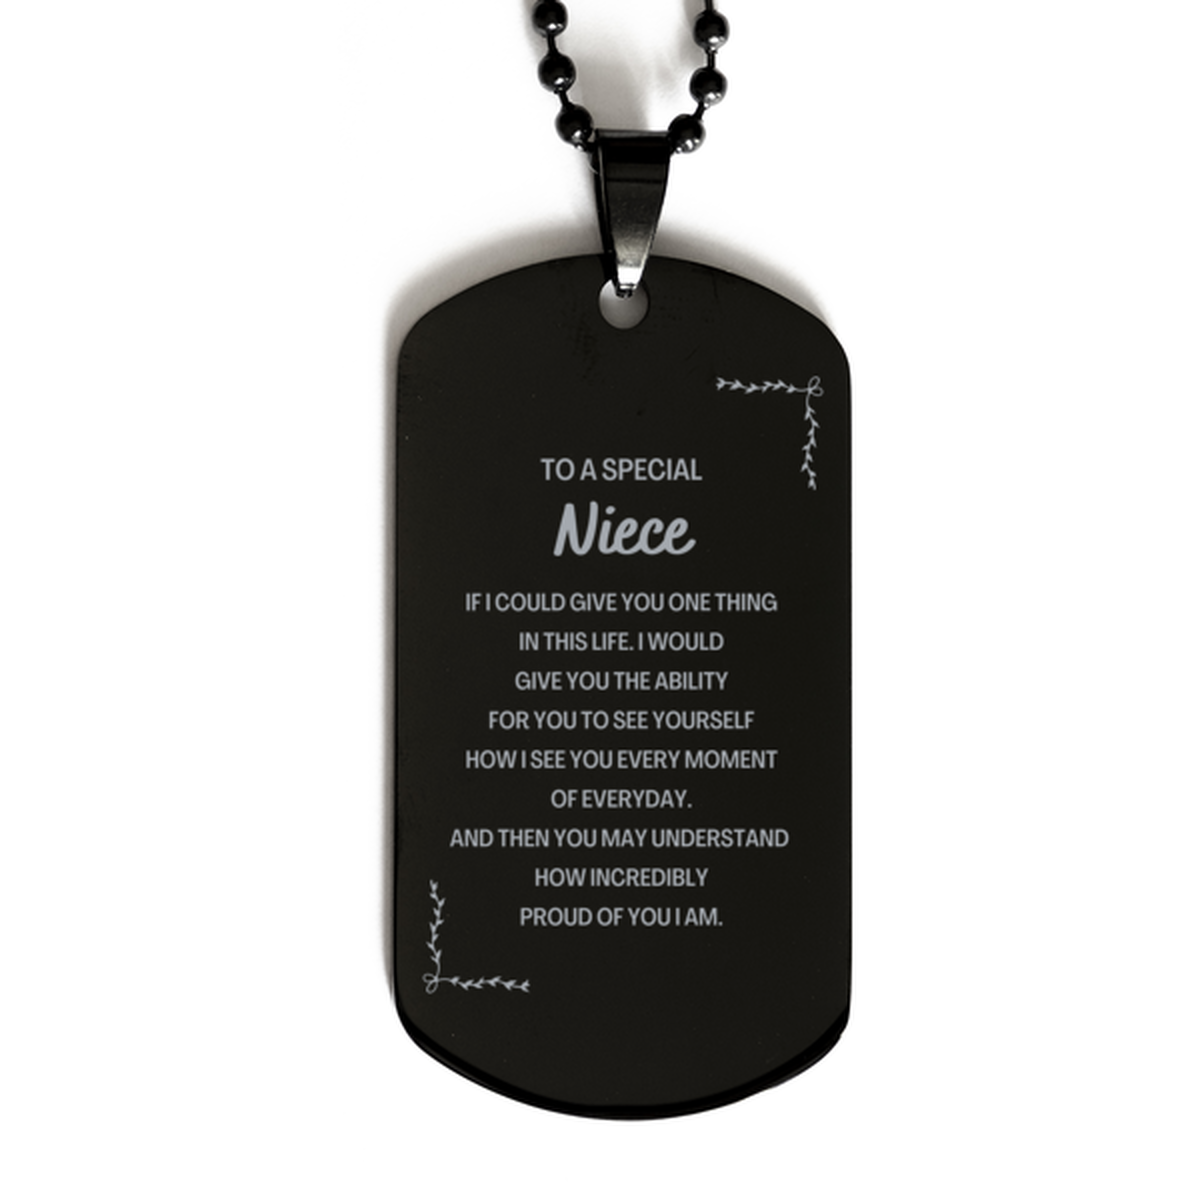 To My Niece Black Dog Tag, Gifts For Niece Engraved, Inspirational Gifts for Christmas Birthday, Epic Gifts for Niece To A Special Niece how incredibly proud of you I am